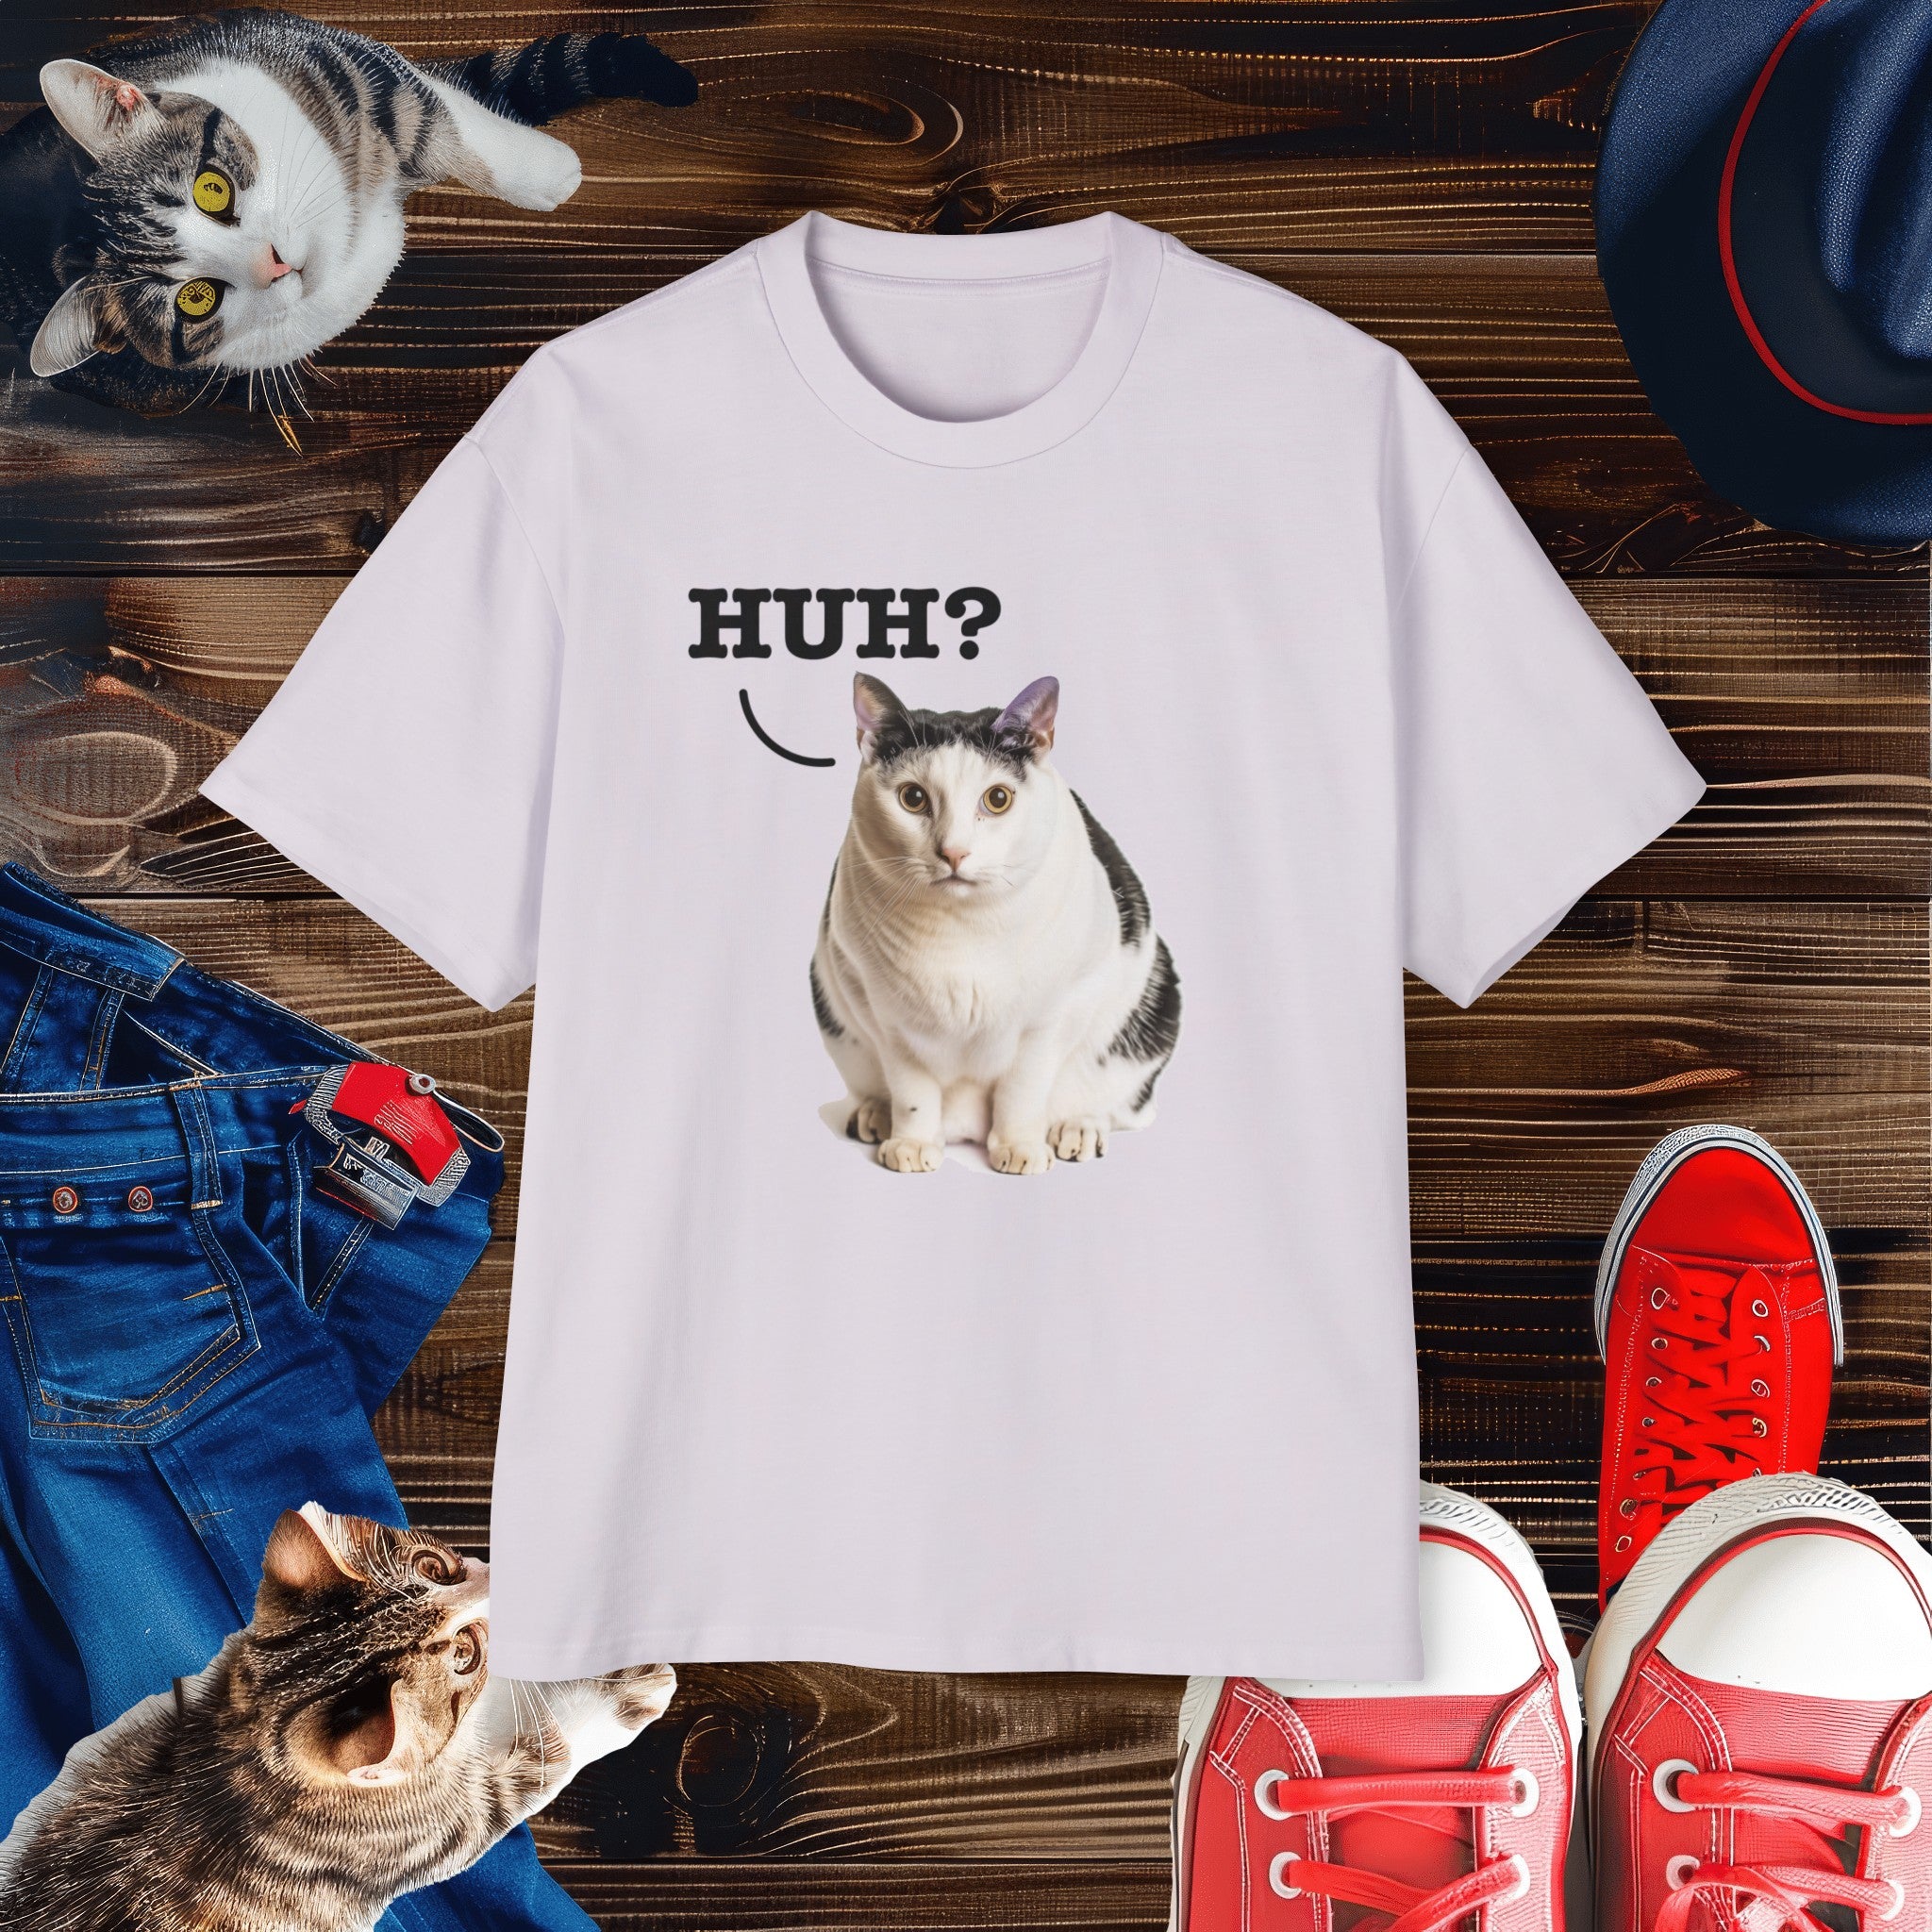 'Huh?' Cat Meme T-Shirt - Funny Cat Expression Tee, Unisex, Perfect Gift for Cat Lovers Heavy Oversized Tee